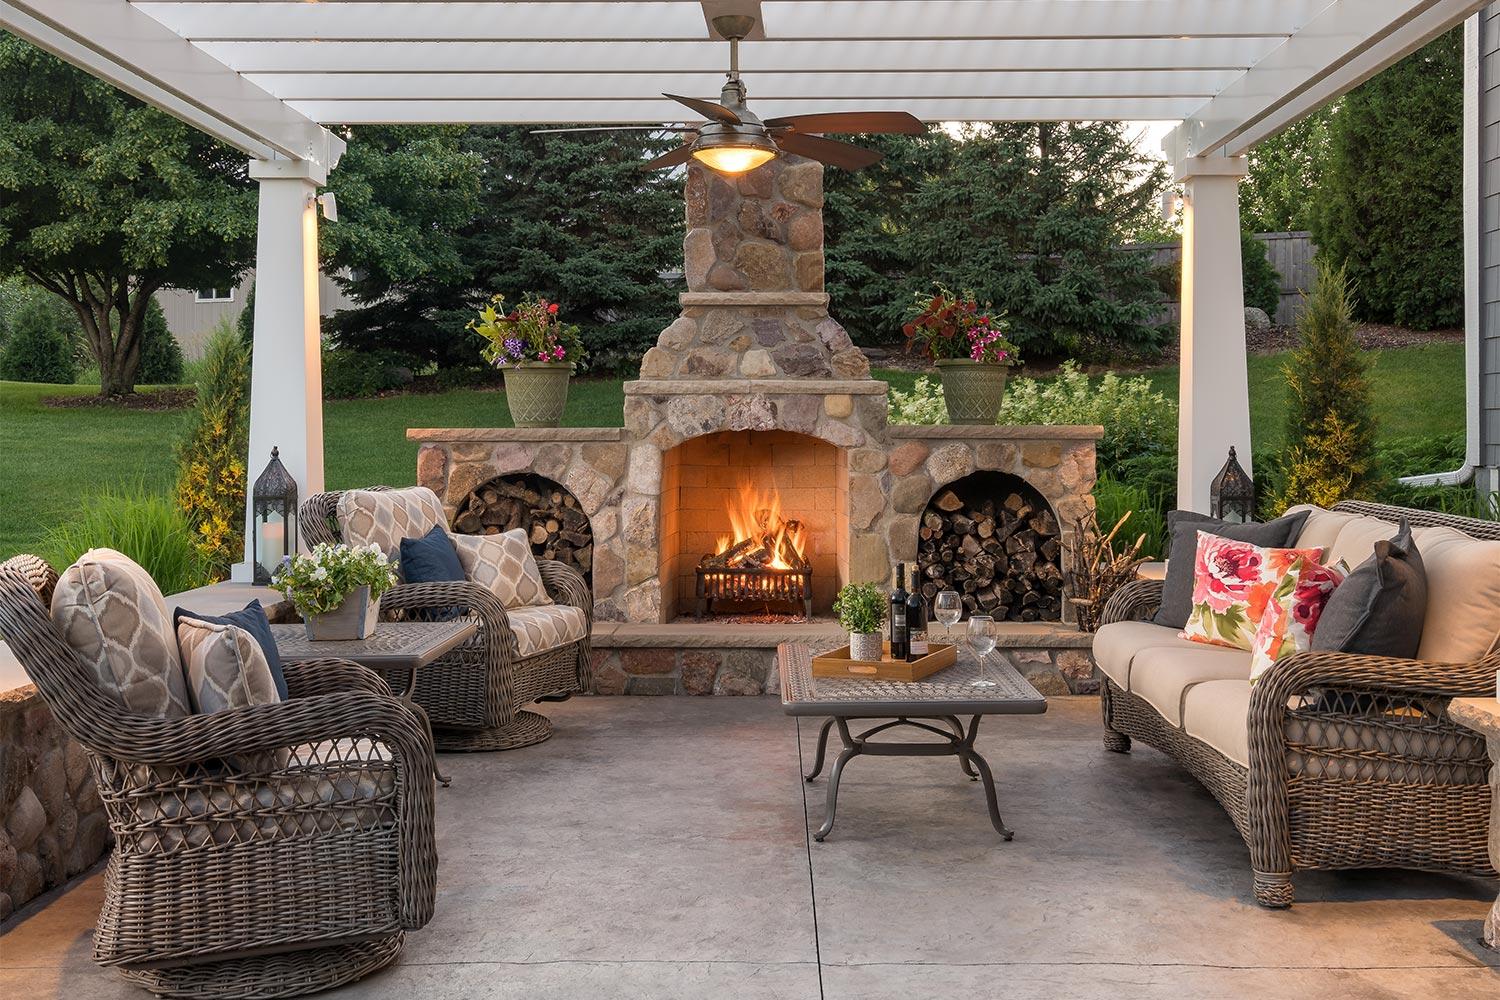 Living room patio with an oversized fireplace, ceiling fan, and pergola.